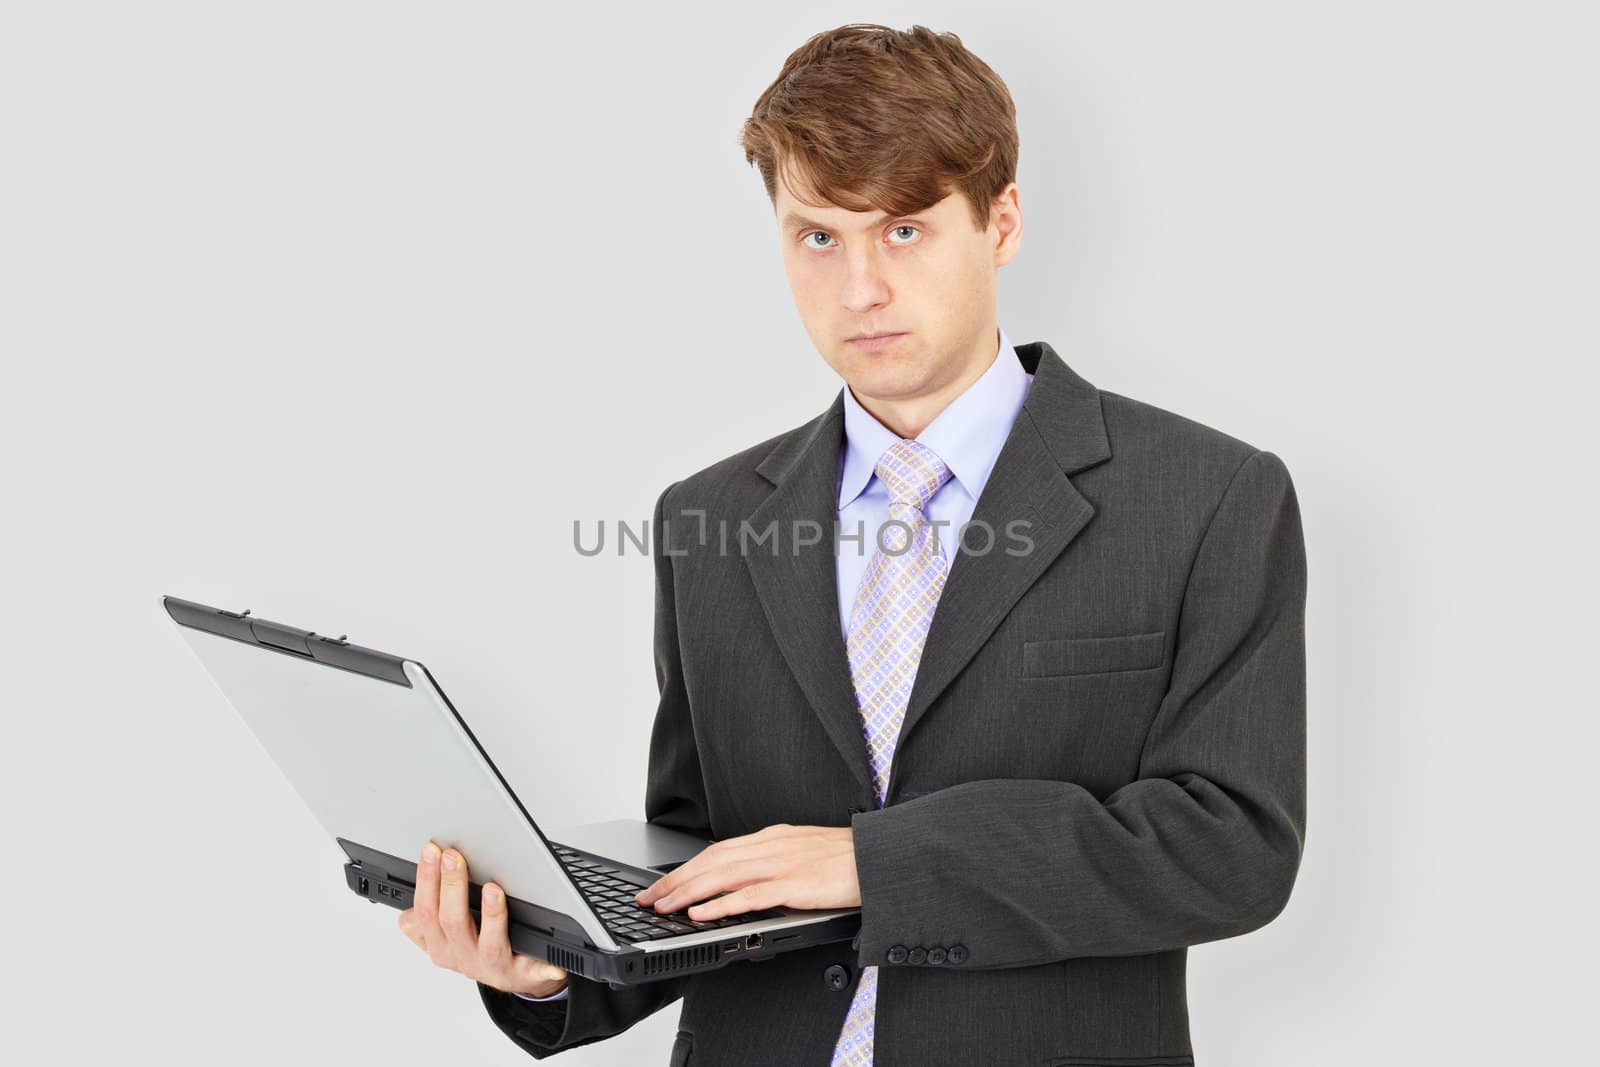 The business man with the laptop on a grey background